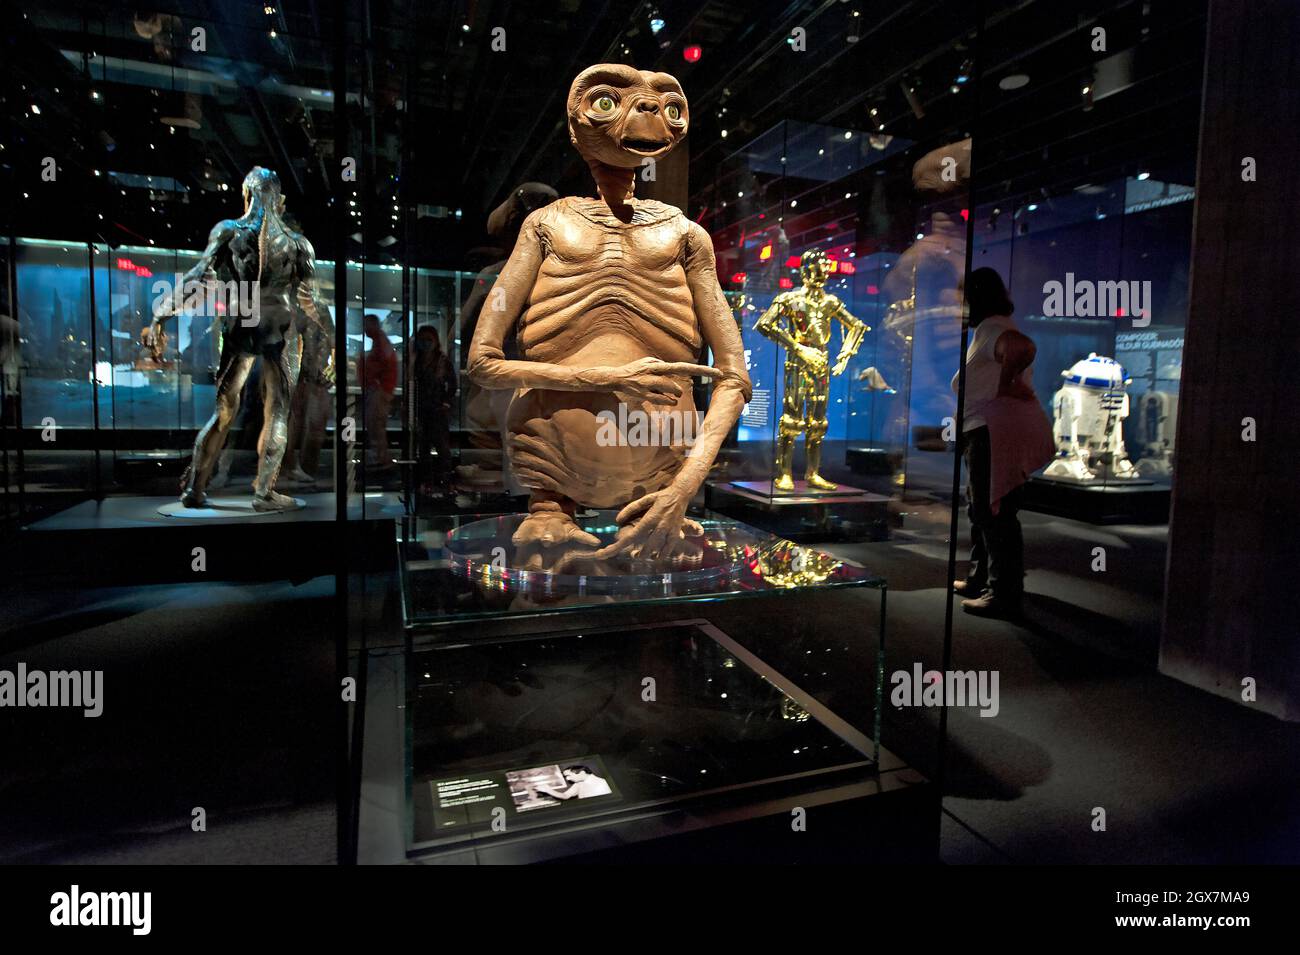 E.T. Charakter in Science Fiction Ausstellung im Academy Museum of Motion Picturs, Los Angeles, Kalifornien Stockfoto